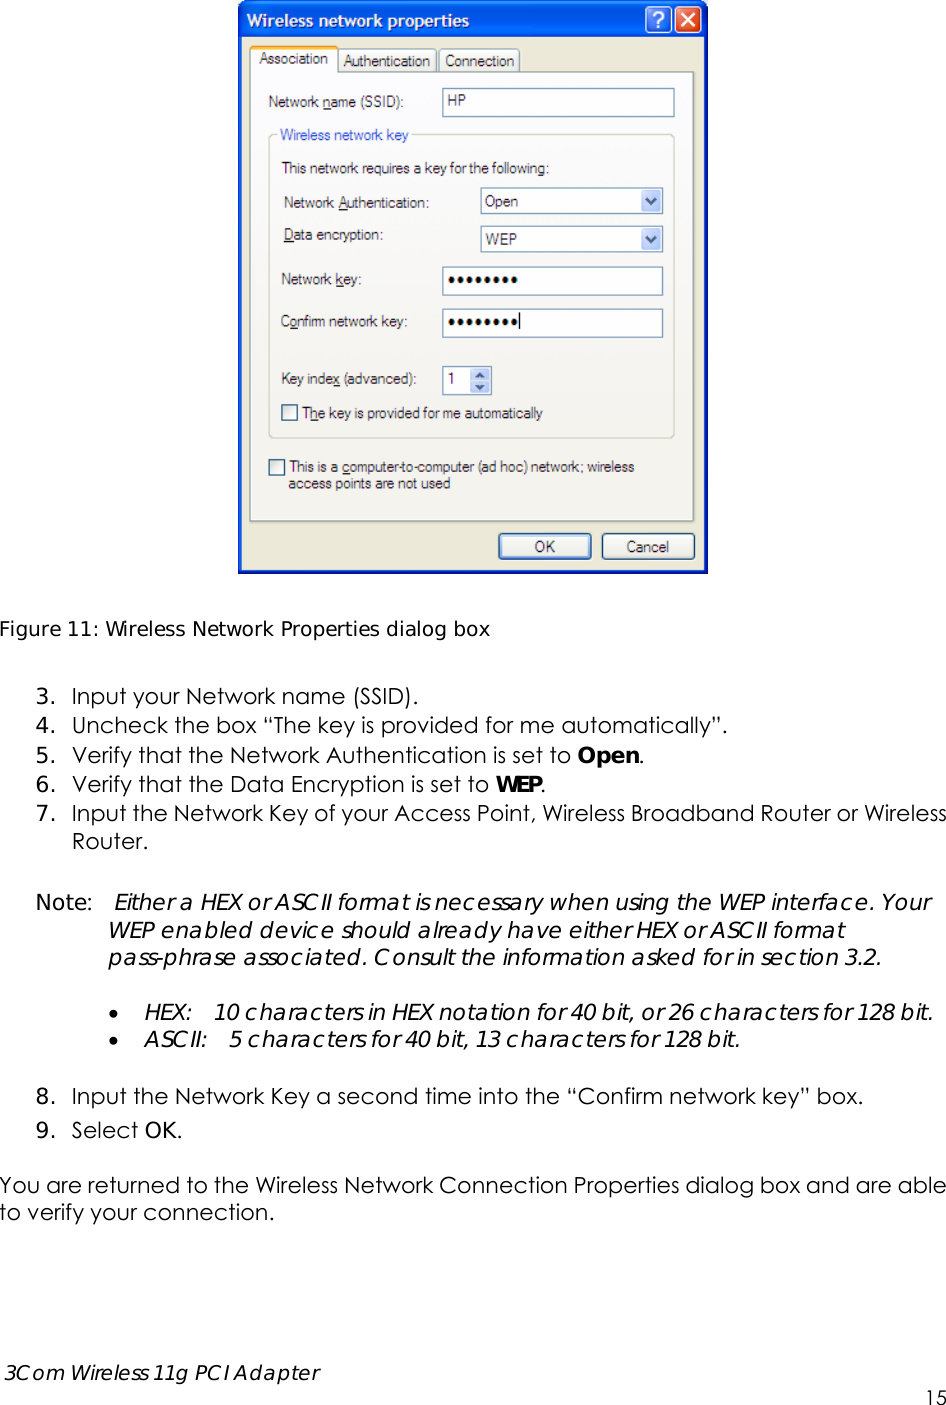      3Com Wireless 11g PCI Adapter     15   Figure 11: Wireless Network Properties dialog box  3. Input your Network name (SSID).   4. Uncheck the box “The key is provided for me automatically”. 5. Verify that the Network Authentication is set to Open. 6. Verify that the Data Encryption is set to WEP. 7. Input the Network Key of your Access Point, Wireless Broadband Router or Wireless Router.  Note:  Either a HEX or ASCII format is necessary when using the WEP interface. Your WEP enabled device should already have either HEX or ASCII format pass-phrase associated. Consult the information asked for in section 3.2.   HEX:    10 characters in HEX notation for 40 bit, or 26 characters for 128 bit.  ASCII:    5 characters for 40 bit, 13 characters for 128 bit.  8. Input the Network Key a second time into the “Confirm network key” box. 9. Select OK.  You are returned to the Wireless Network Connection Properties dialog box and are able to verify your connection.       